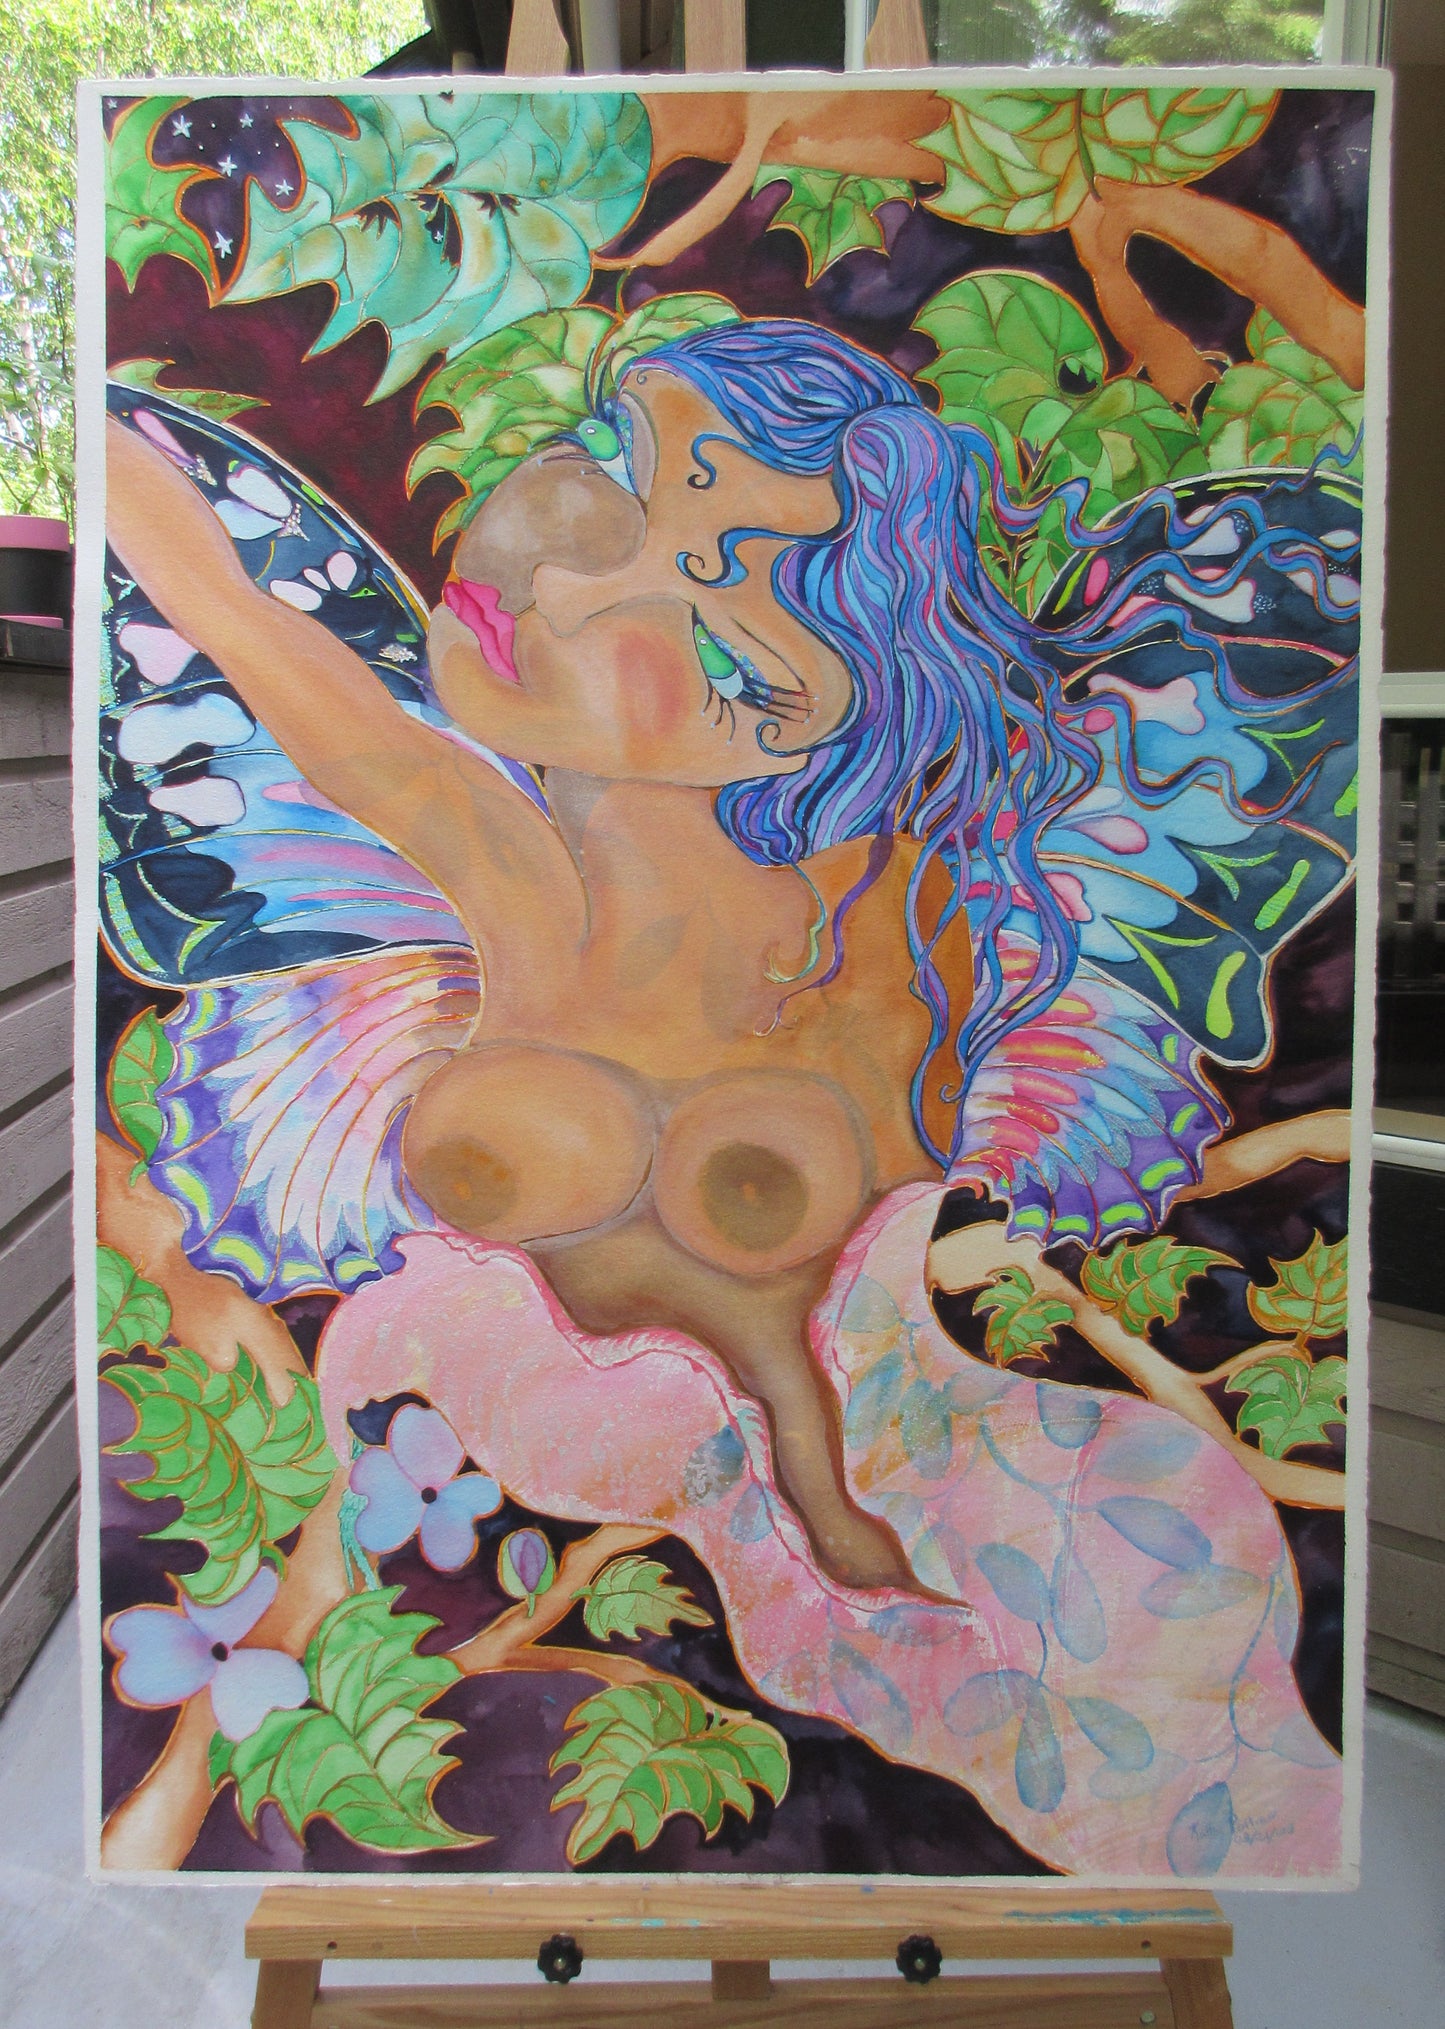 Metamorphosis Mixed Media painting on paper by Kathy Poitras, SALE ENDS MARCH 9th